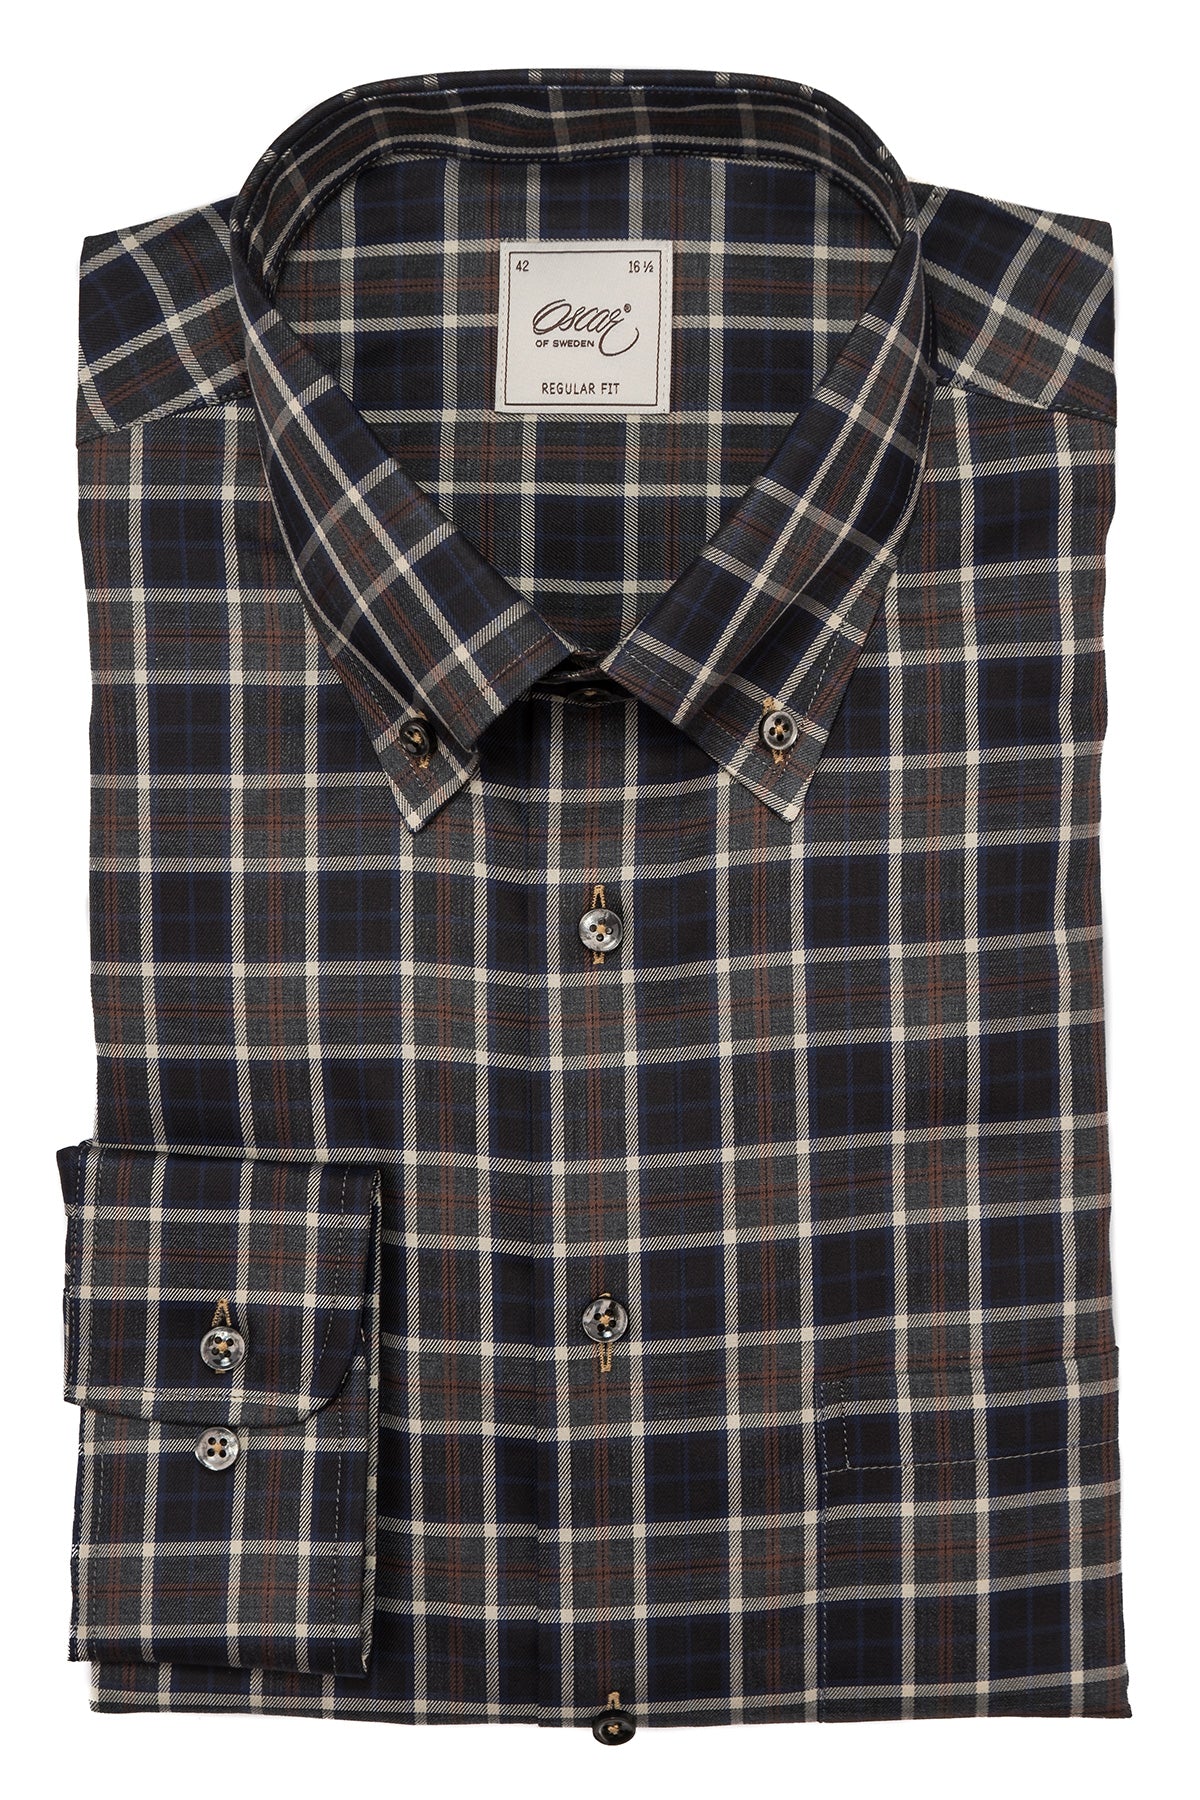 Black checked flannel button down regular fit shirt